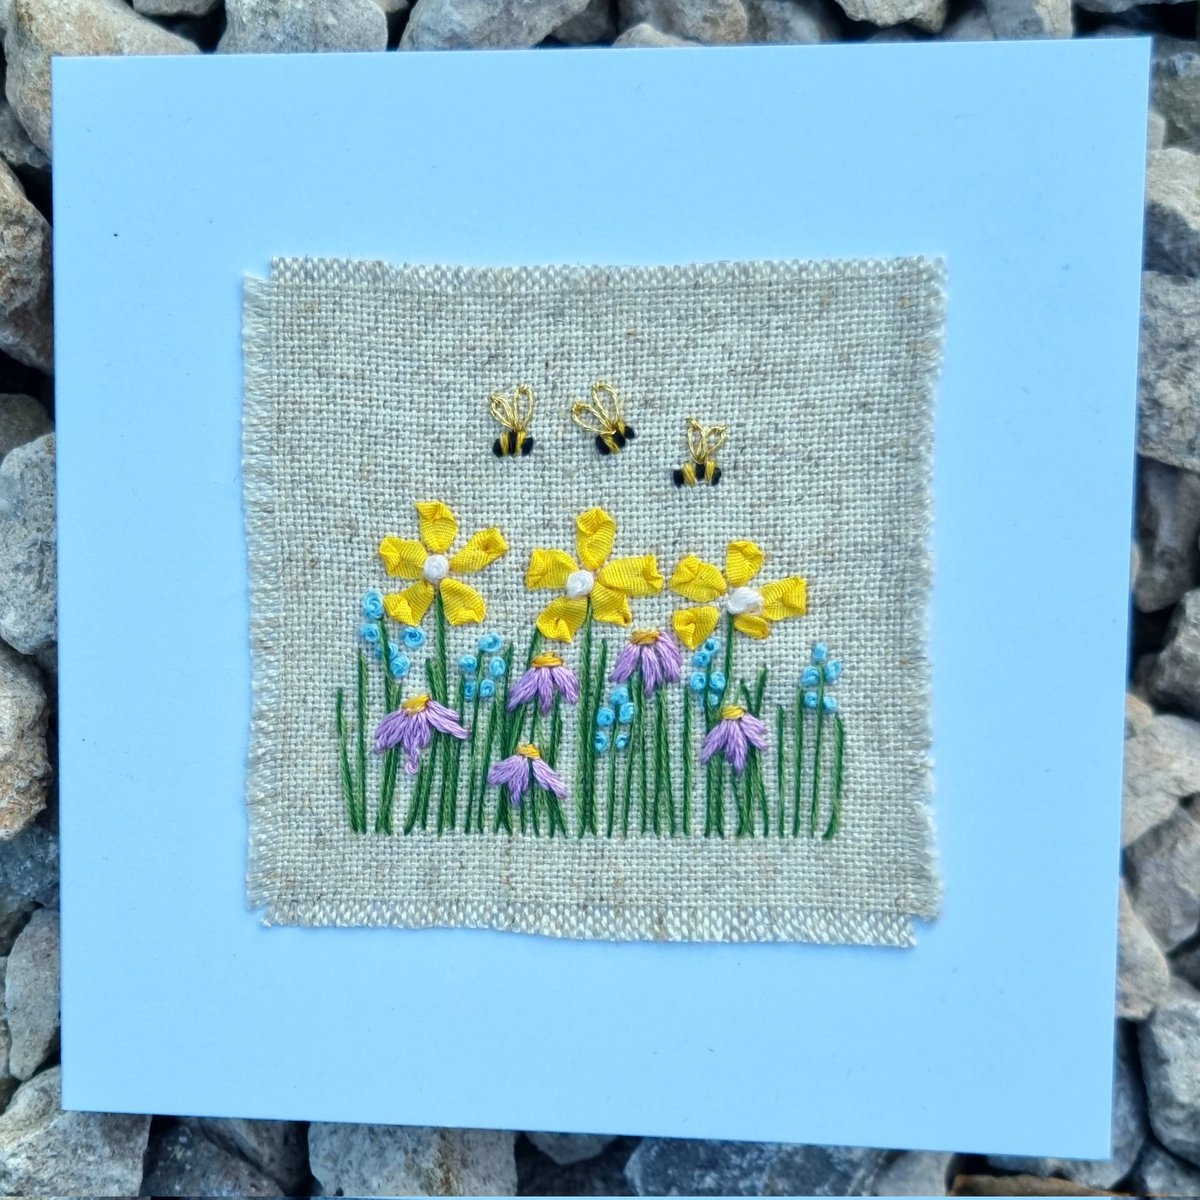 More ready-made #cards up for grabs. #Bees and #flowers are always popular    #craft #SmallBusiness